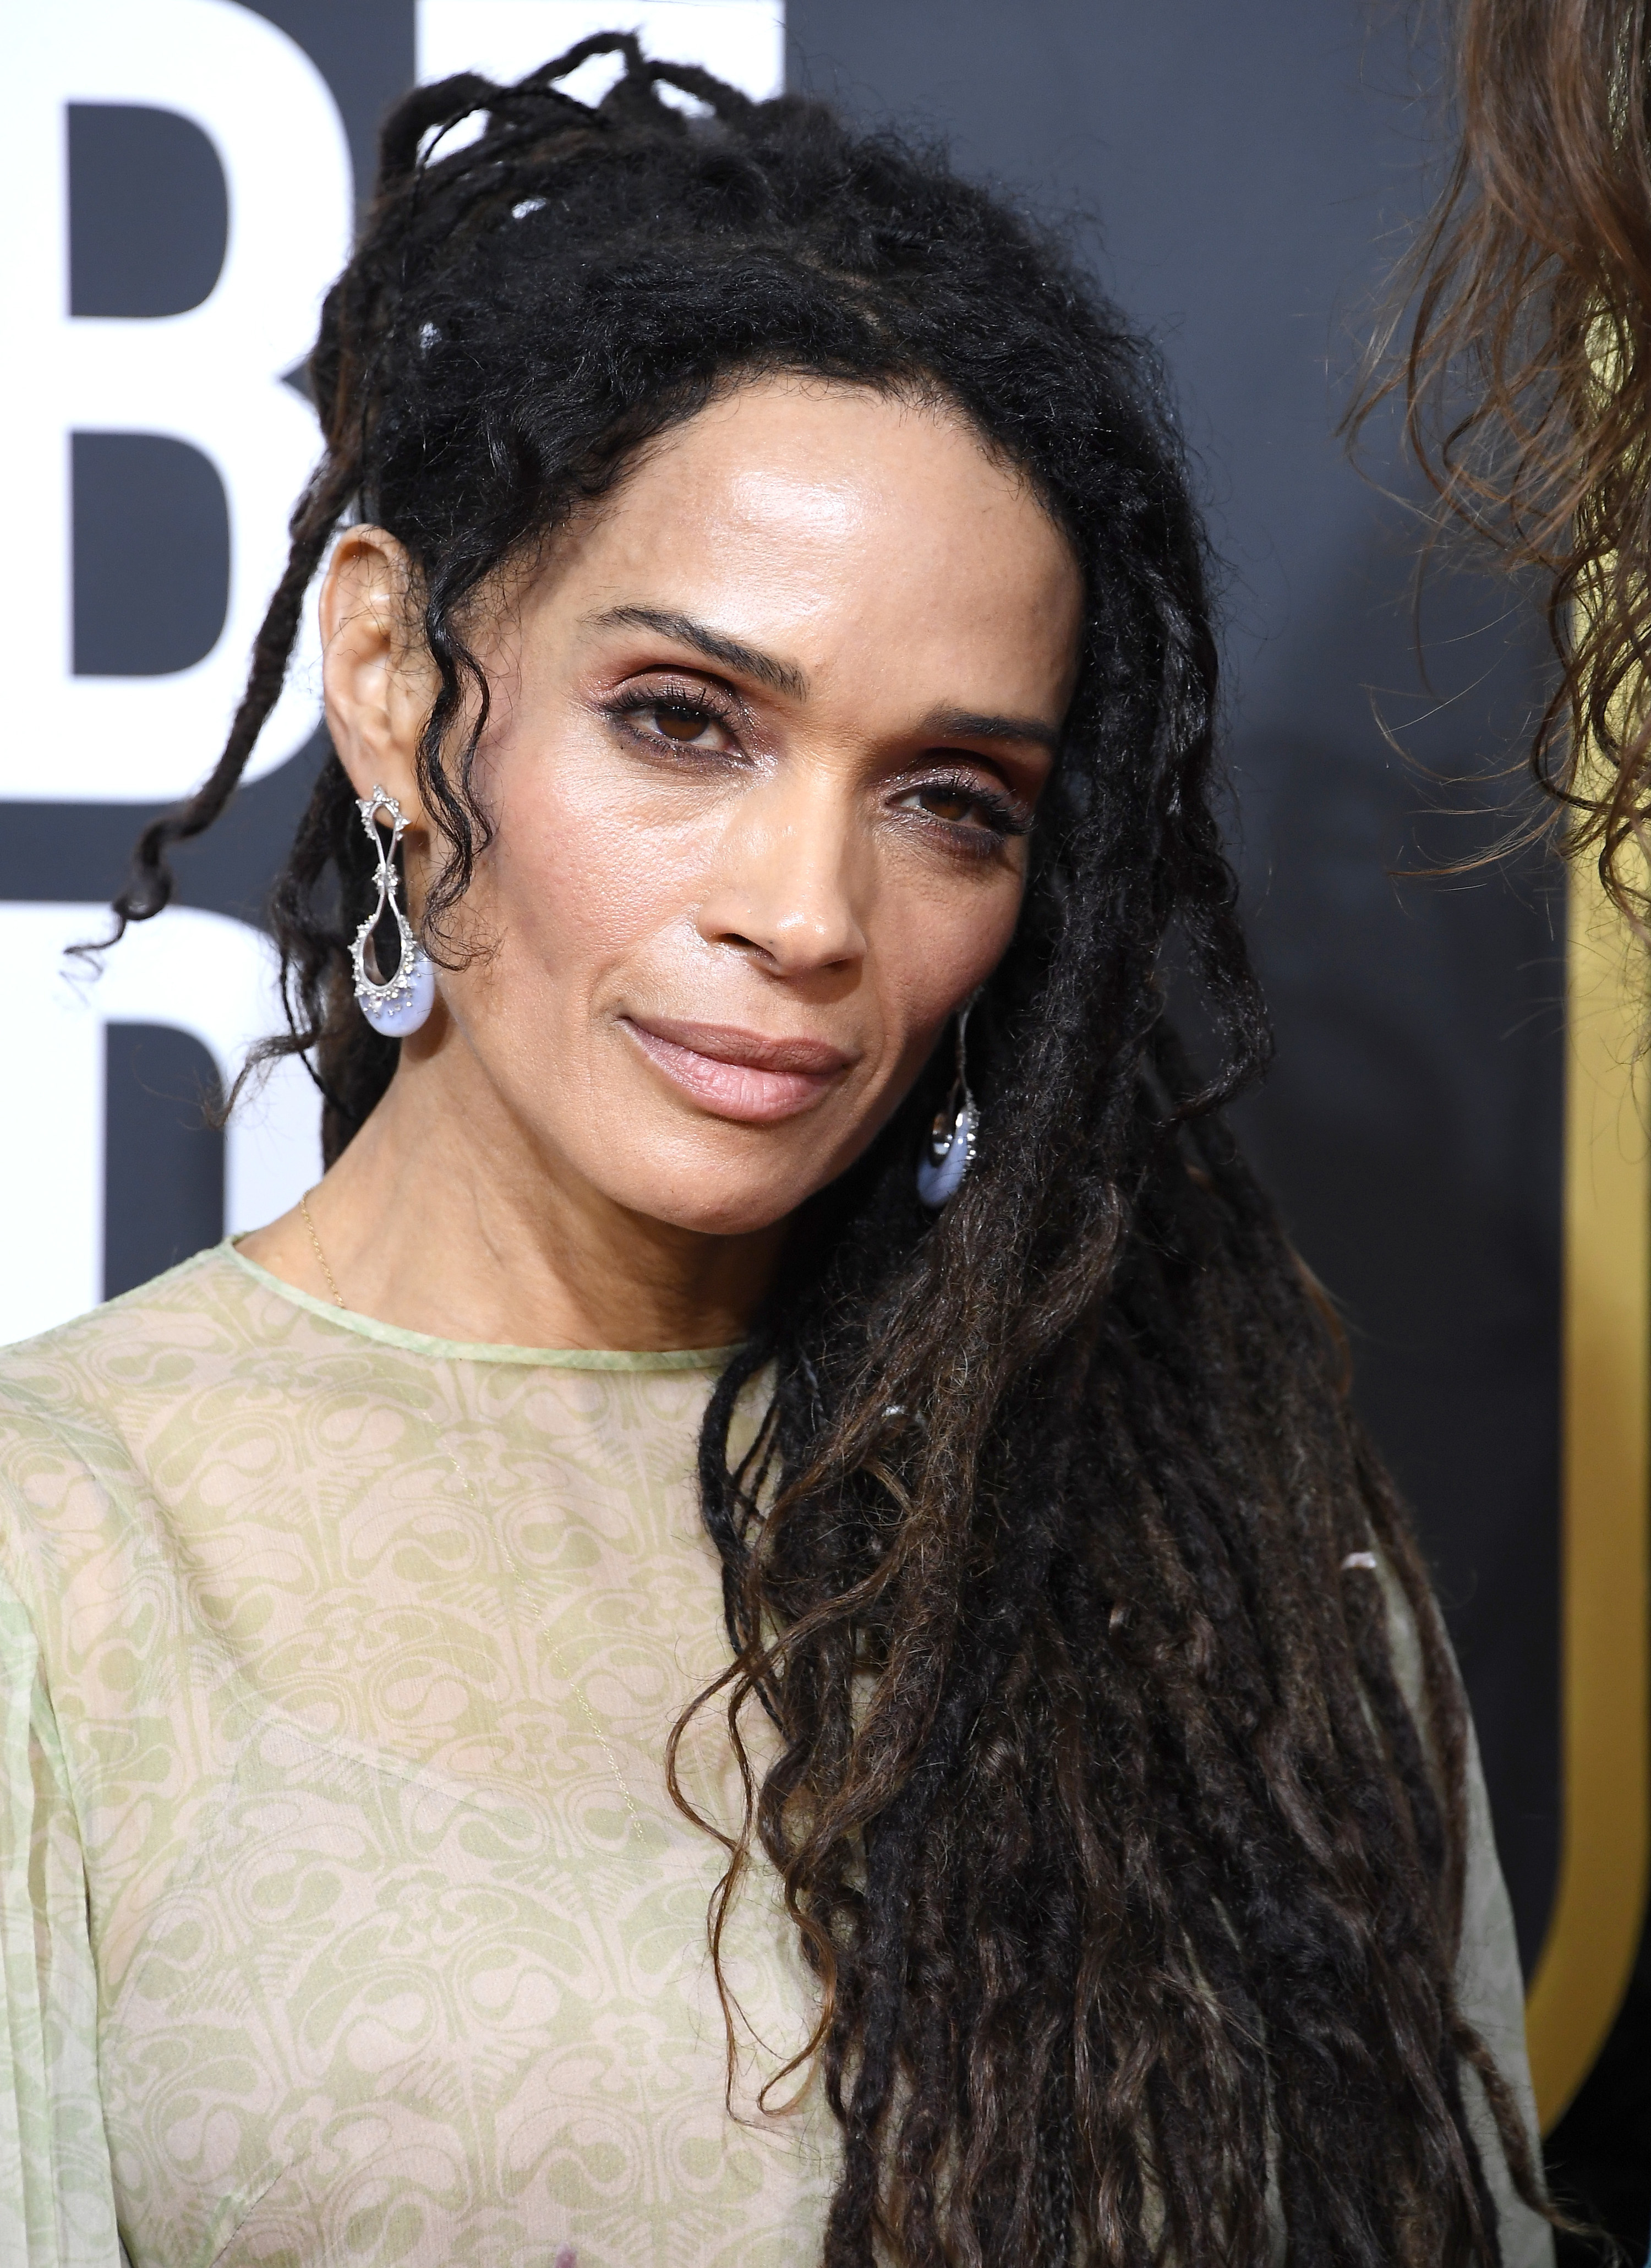 Lisa Bonet poses at the Golden Globes in January 2020